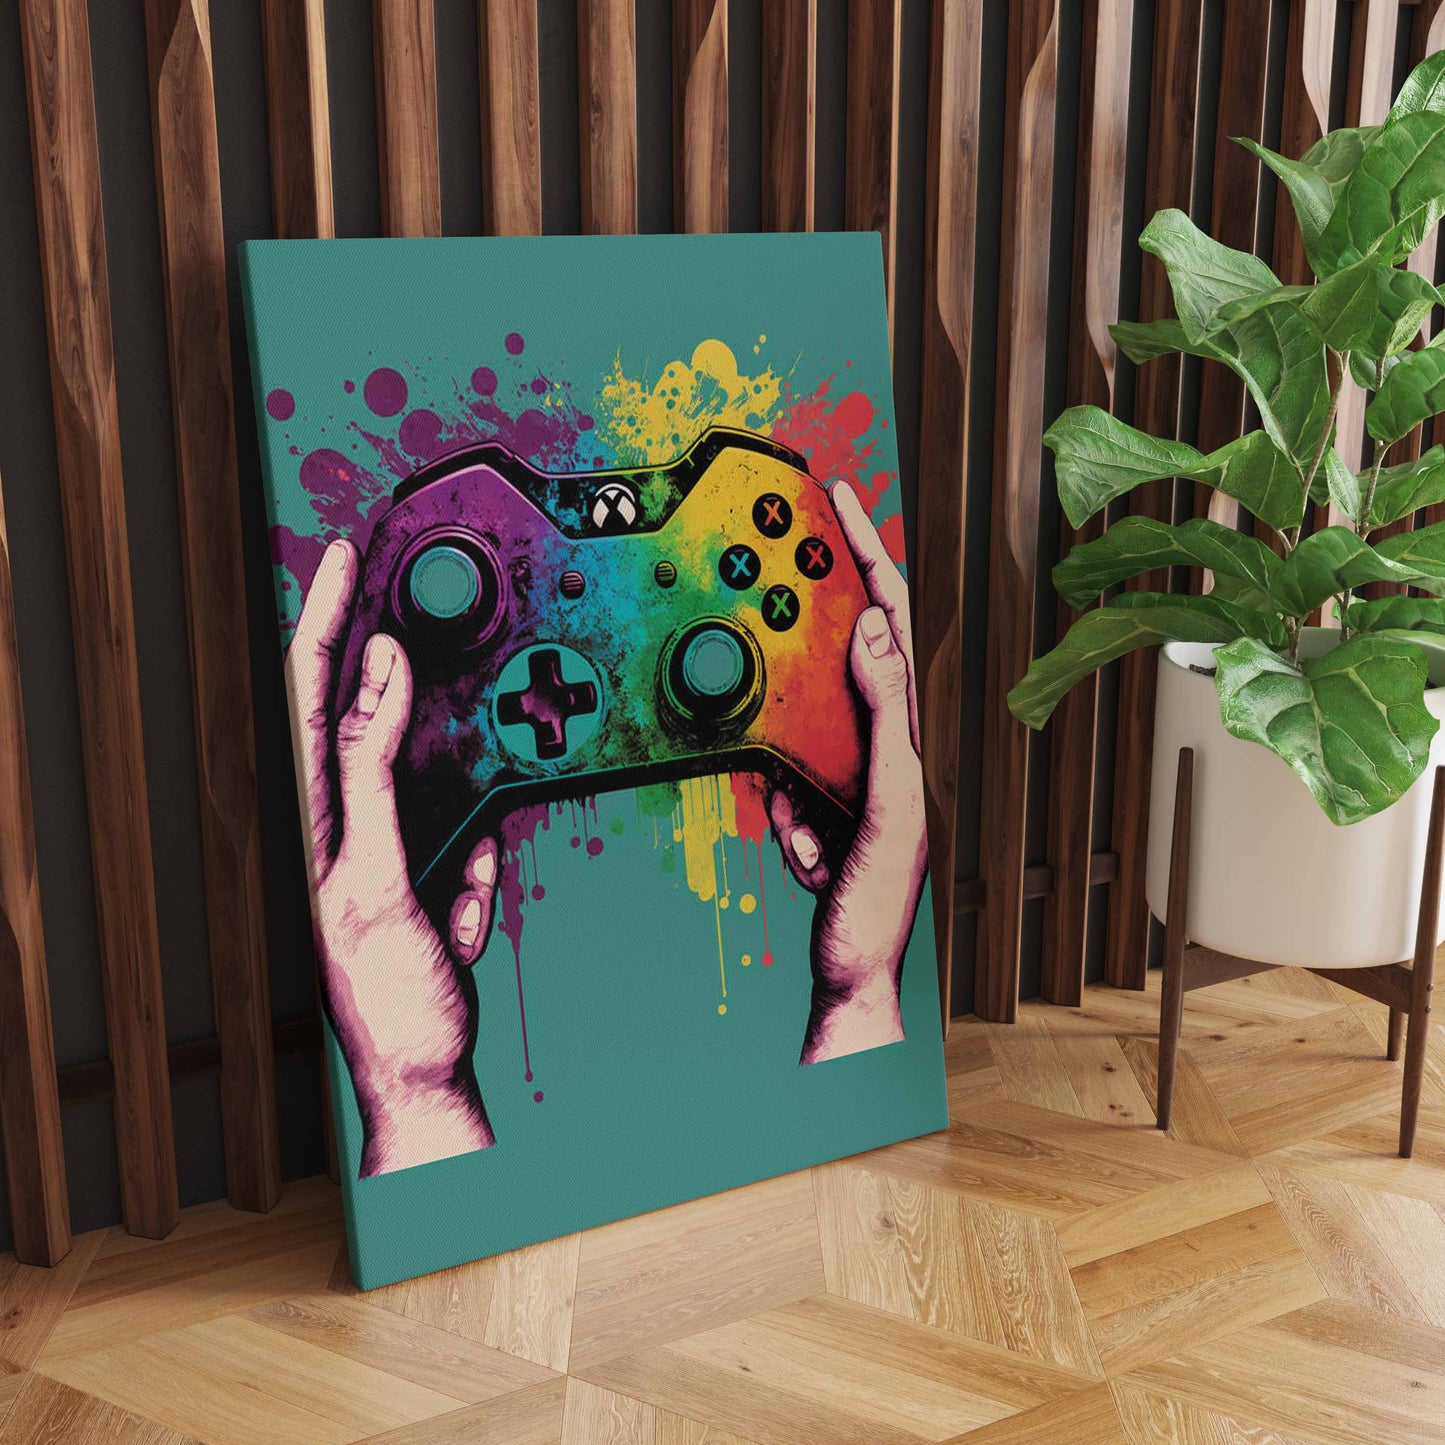 Colorful Punk Neon Gamer Controller Wall Art, Cool Gaming Fabric Print - Abstract Aesthetic - Esports Game Home Decoration S04E28